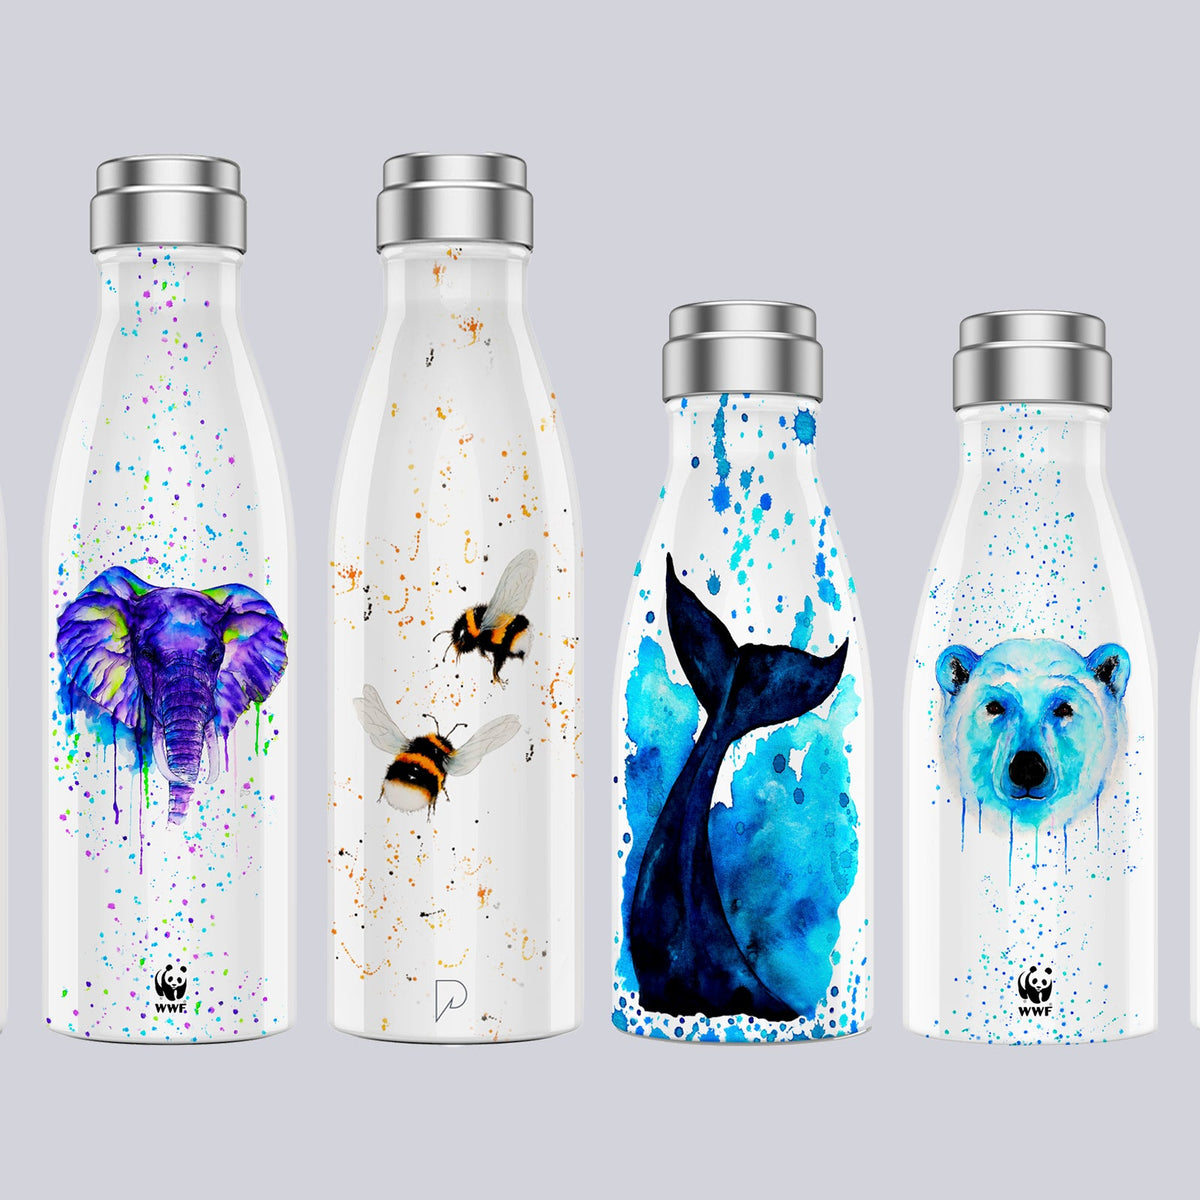 Hot Selling Innovative Product H2O Water Bottle Frosted Plastic Water Bottle  - Buy Hot Selling Innovative Product H2O Water Bottle Frosted Plastic Water  Bottle Product on